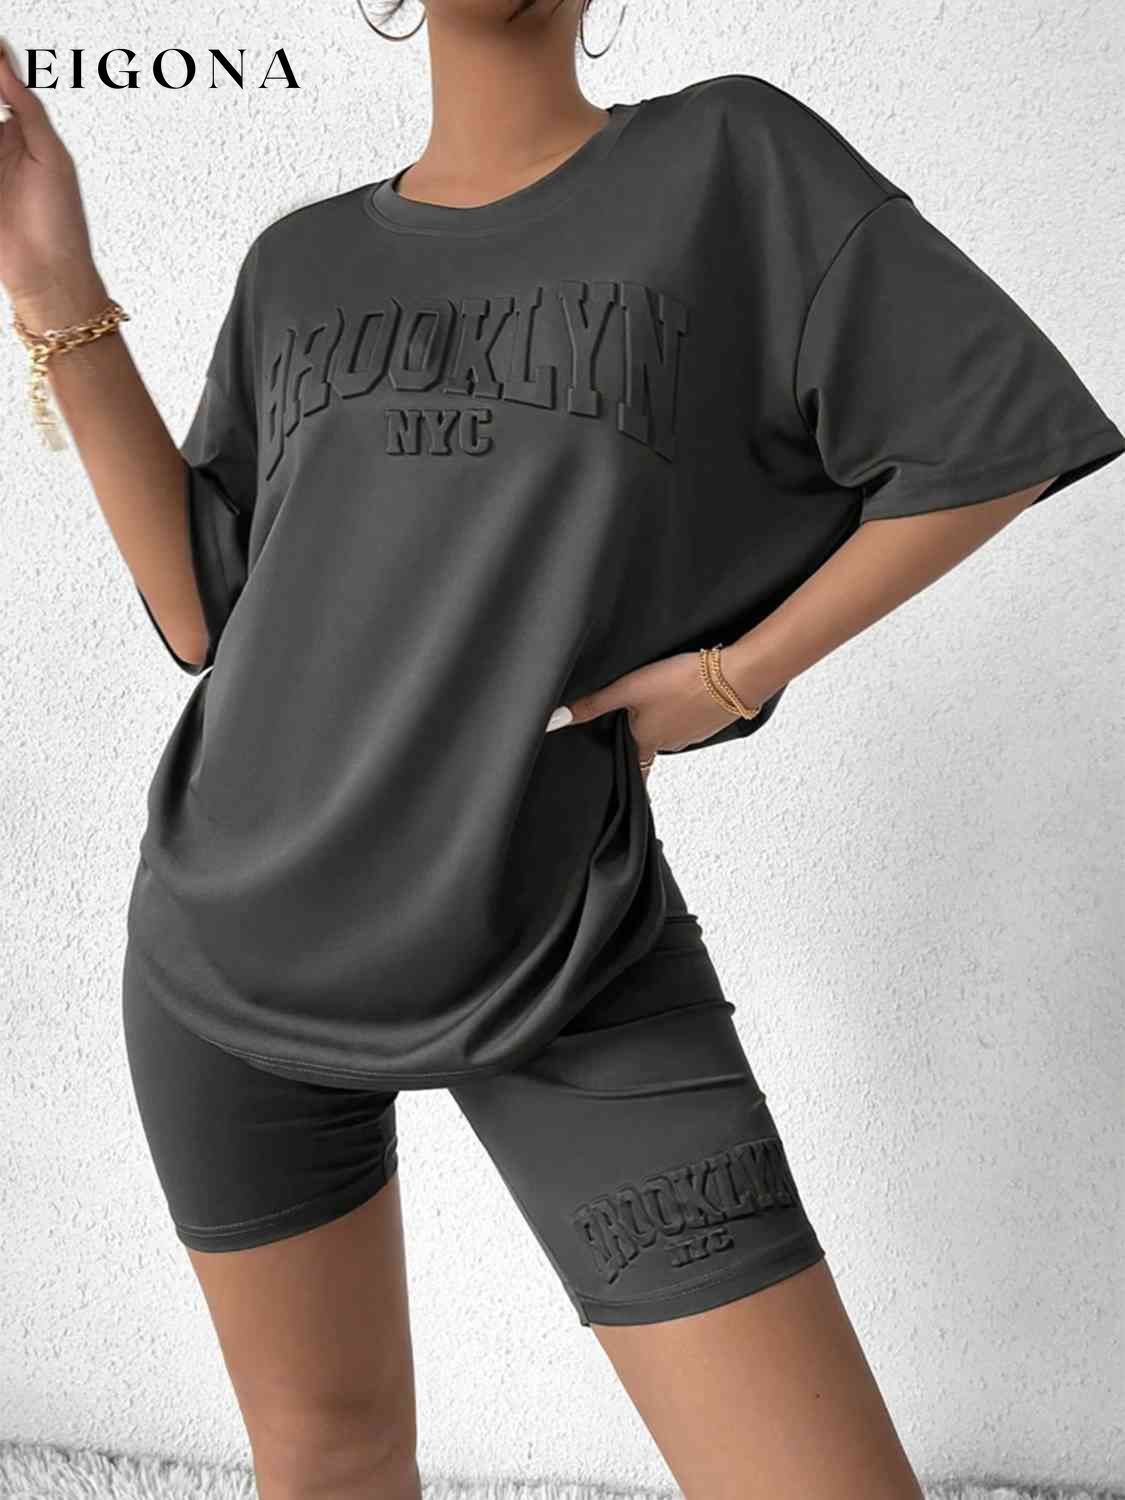 BROOKLYN NYC Graphic Top and Shorts Set Charcoal clothes lounge lounge wear lounge wear sets loungewear S&M&Y Ship From Overseas